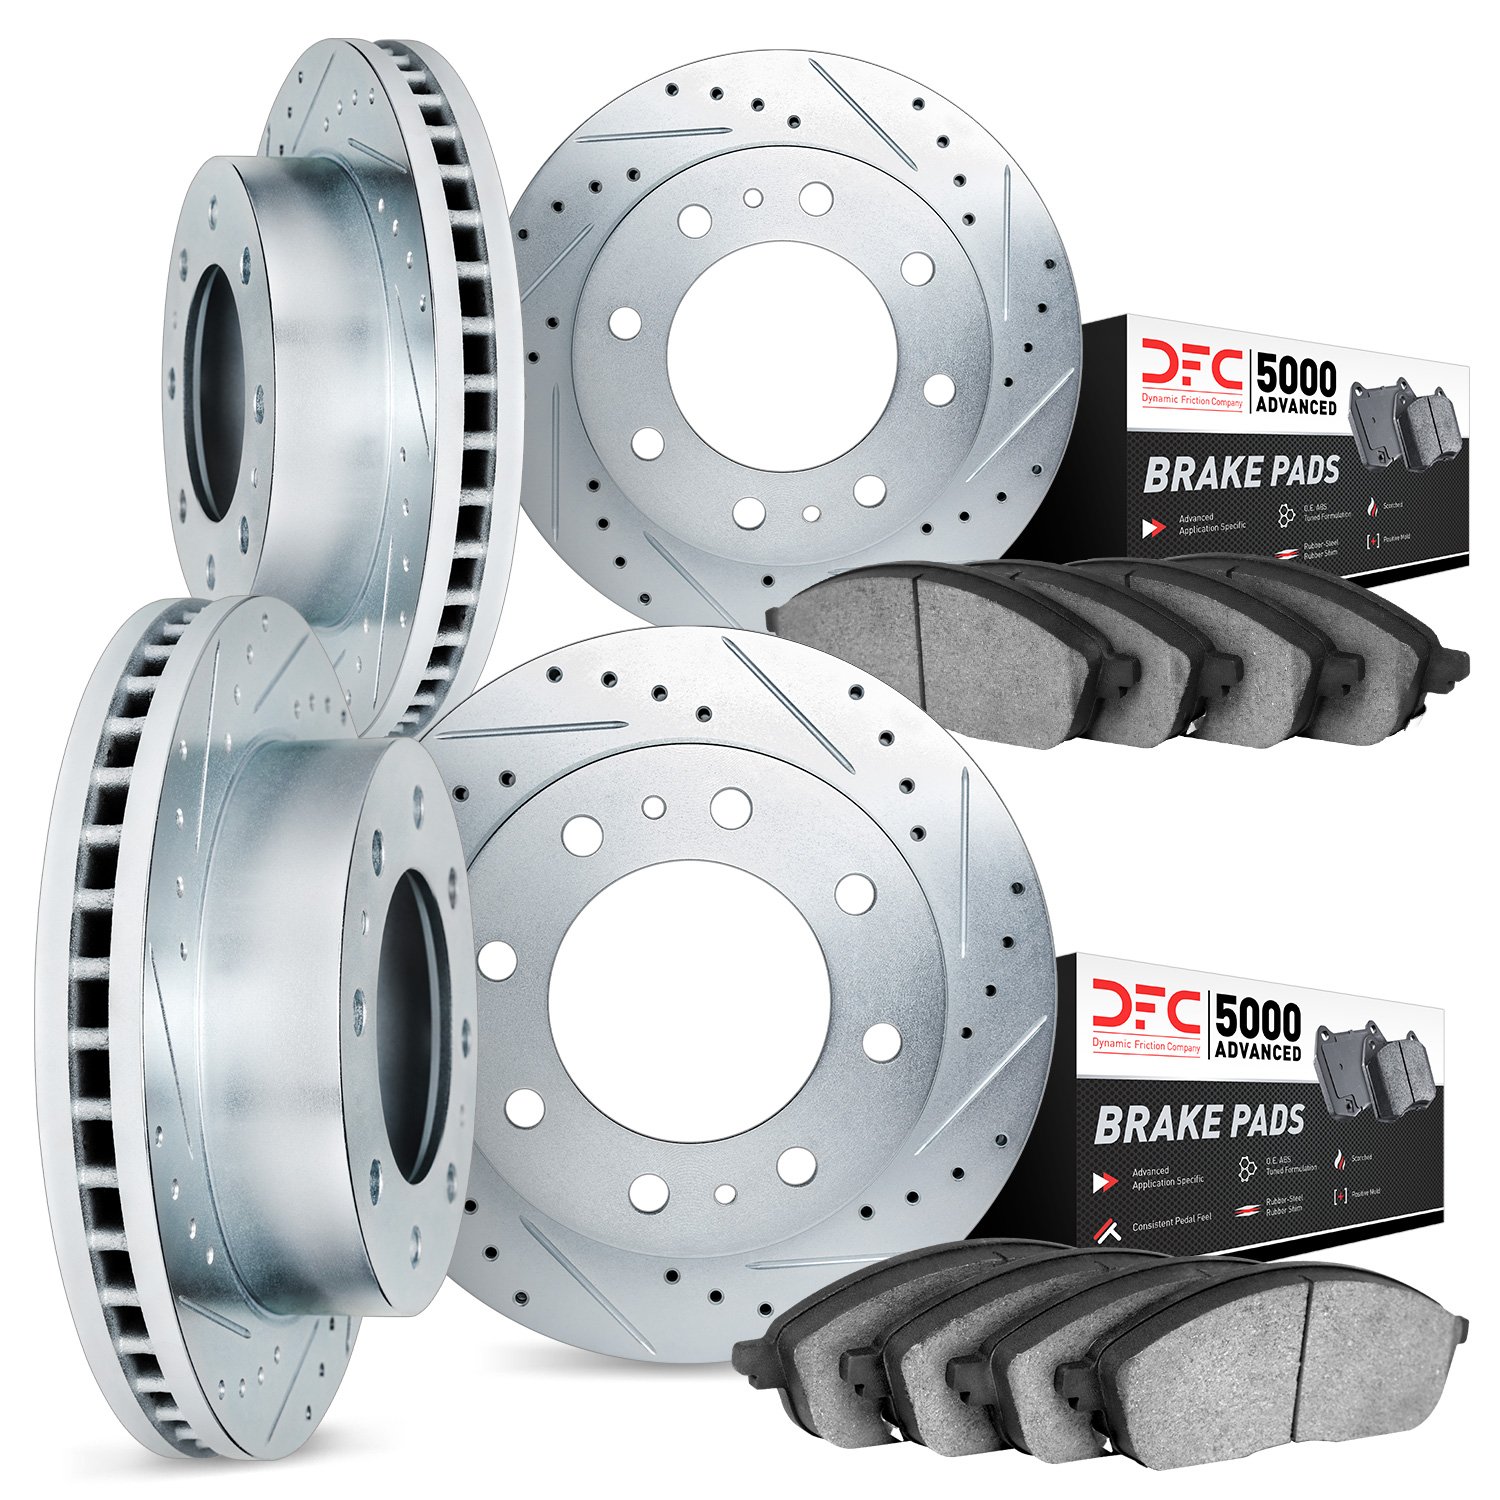 7504-48009 Drilled/Slotted Brake Rotors w/5000 Advanced Brake Pads Kit [Silver], 1999-2013 GM, Position: Front and Rear